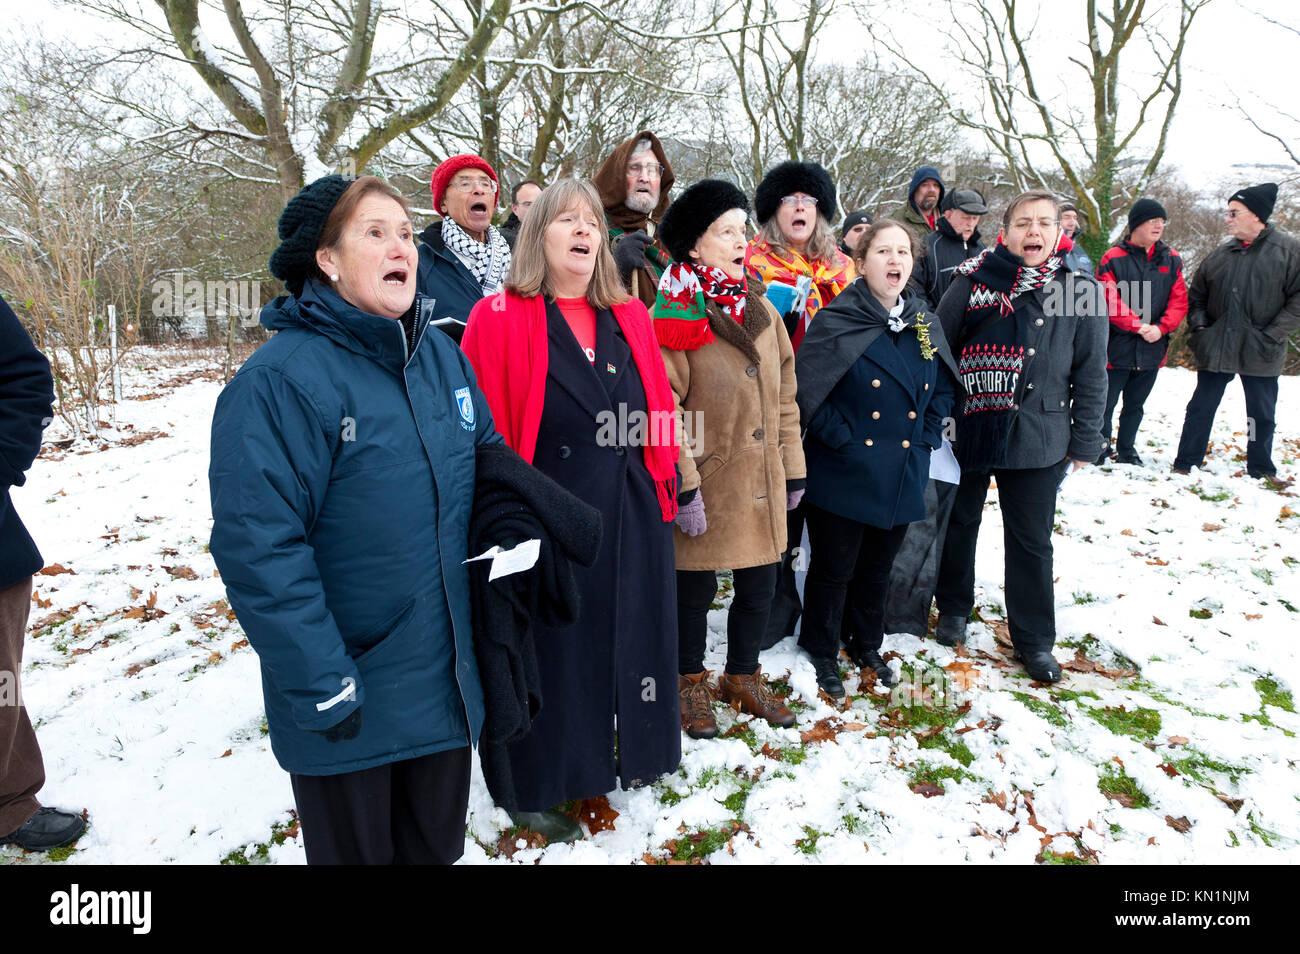 Cilmery, Powys, UK. 9th December 2017.  Members of Cor Cochion (Cardiff Reds Choir) sing at the commemoration. Welsh patriots gather at the memorial stone erected in 1956 to lay wreaths, listen to patriotic music and speeches for the annual commemoration of the assassination of the last true Prince OF Wales - Llywelyn ap Gruffudd - who ruled Gwynedd and most of Wales for 36 years from 1246 to 1282 until his treacherous death on 11th December 1282 at the hands of King Edward I near the small county town of Builth Wells. © Credit: Graham M. Lawrence/Alamy Live News. Stock Photo